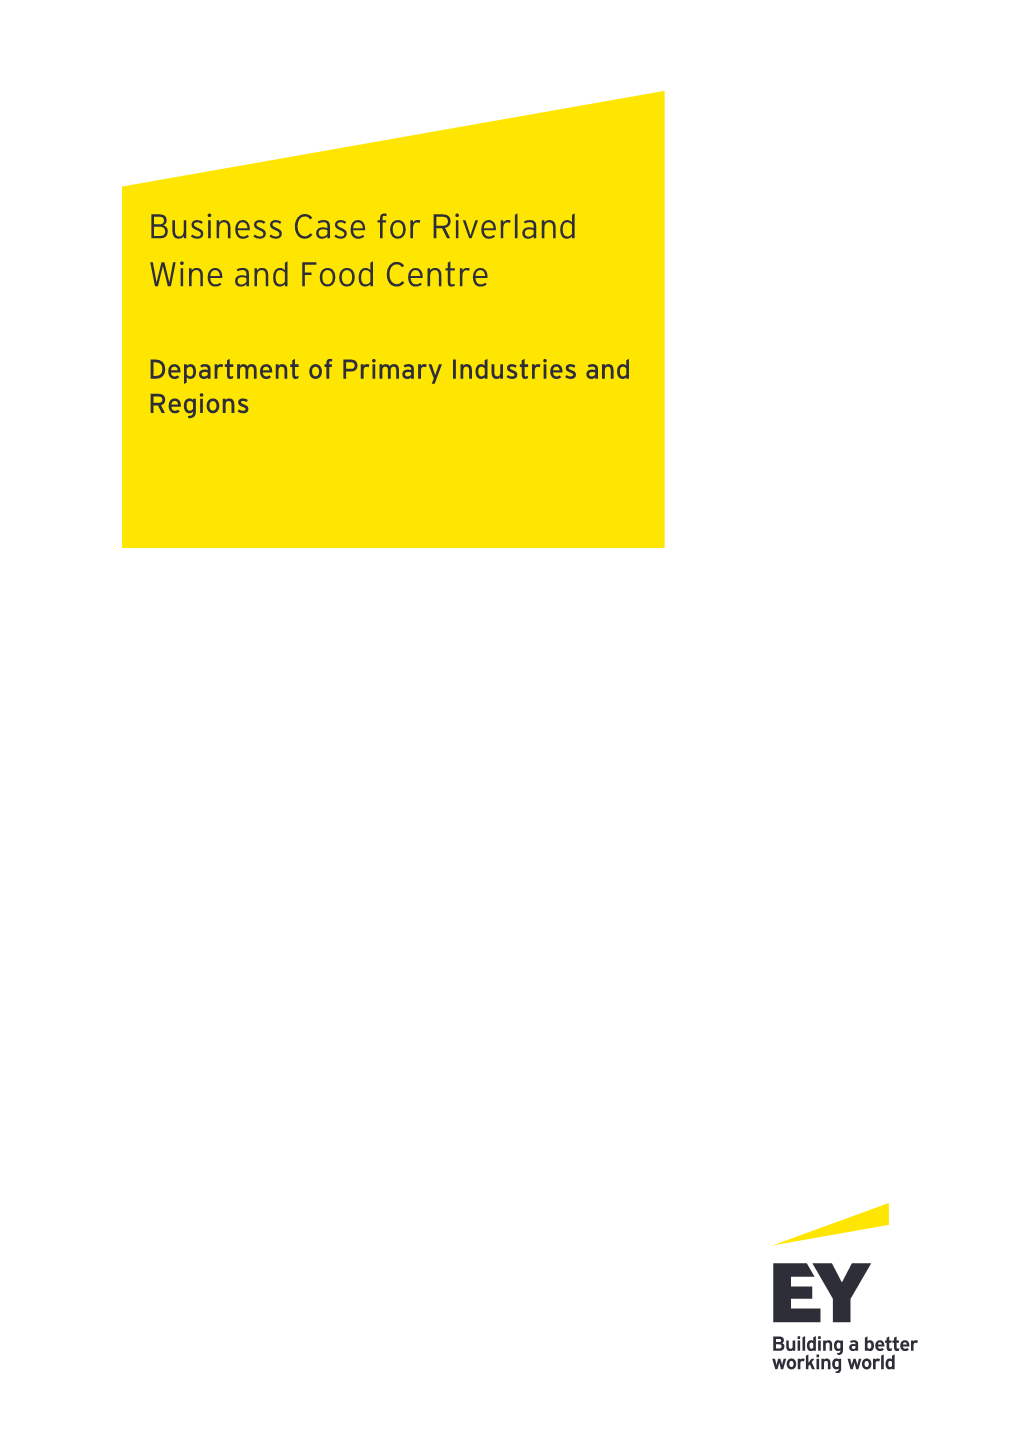 Business Case for Riverland Wine and Food Centre